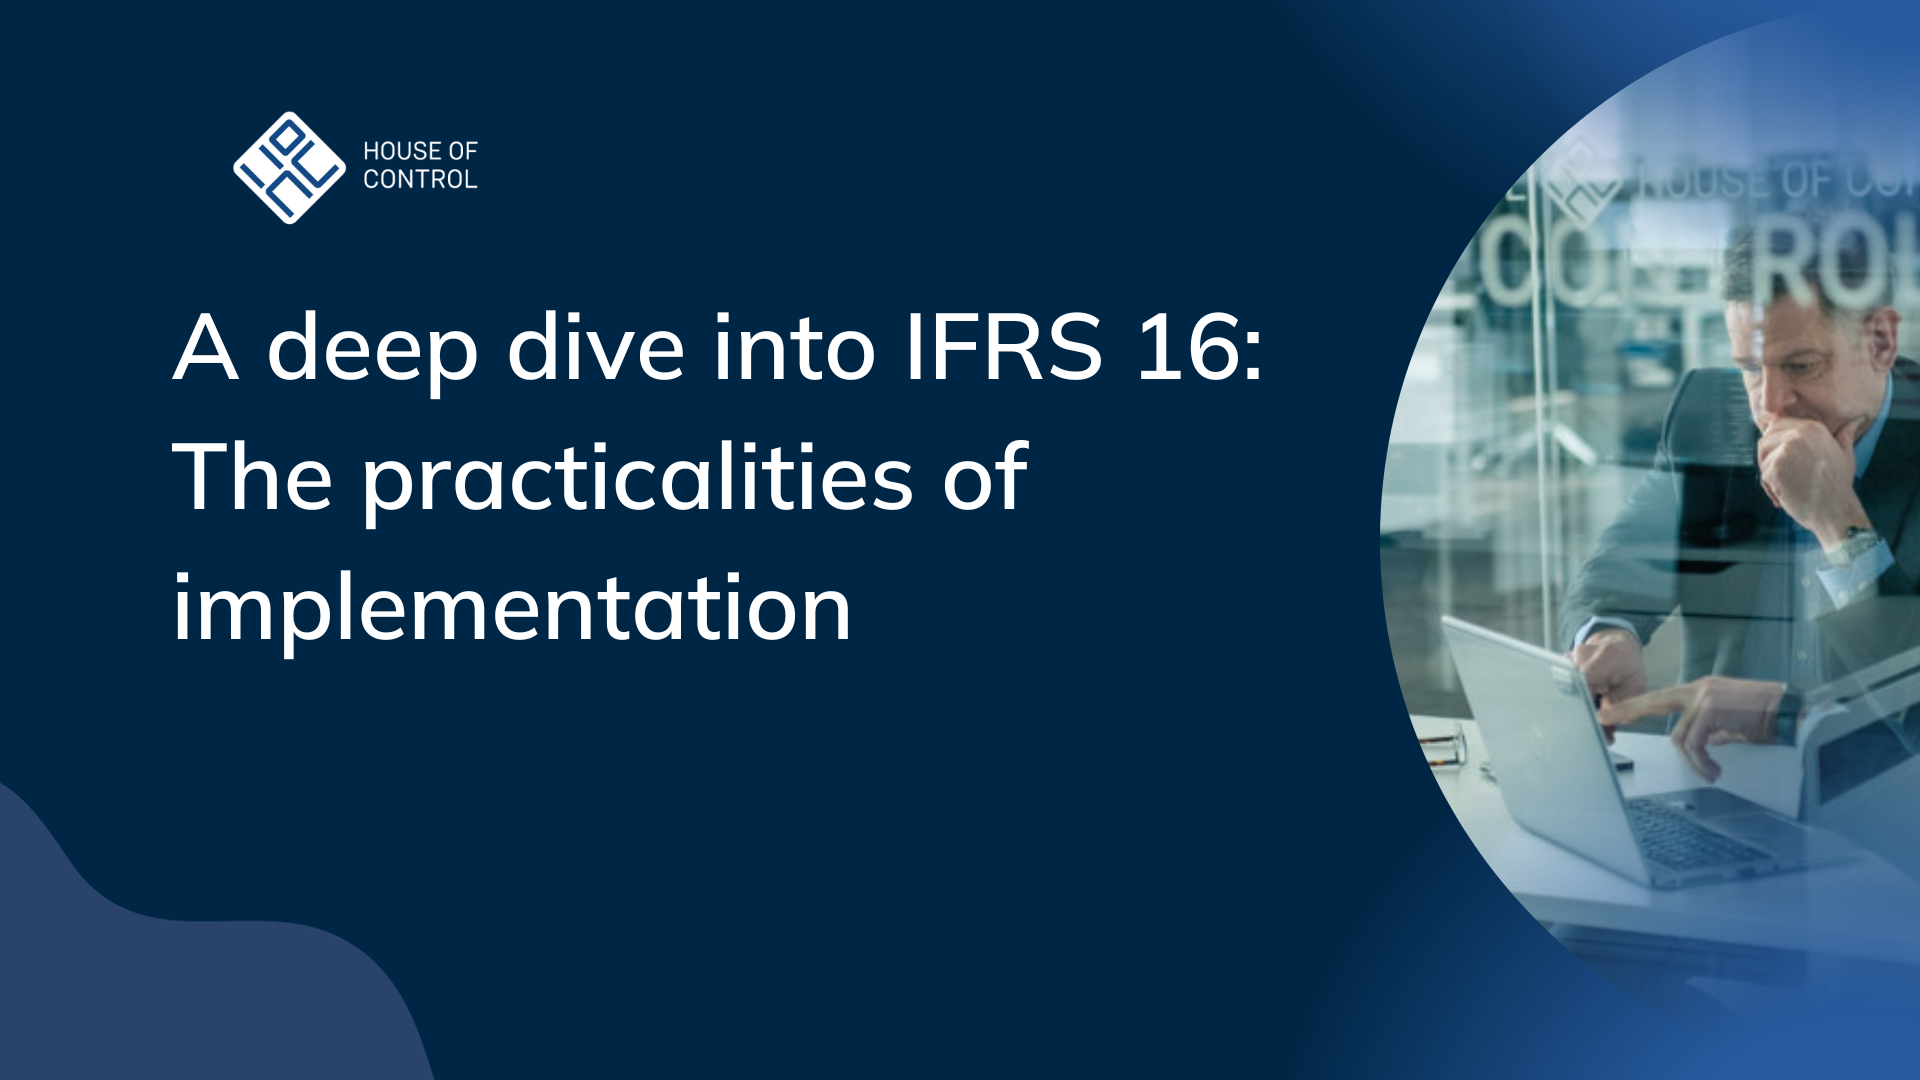 A deep dive into IFRS 16 The practicalitites of implementation (2)